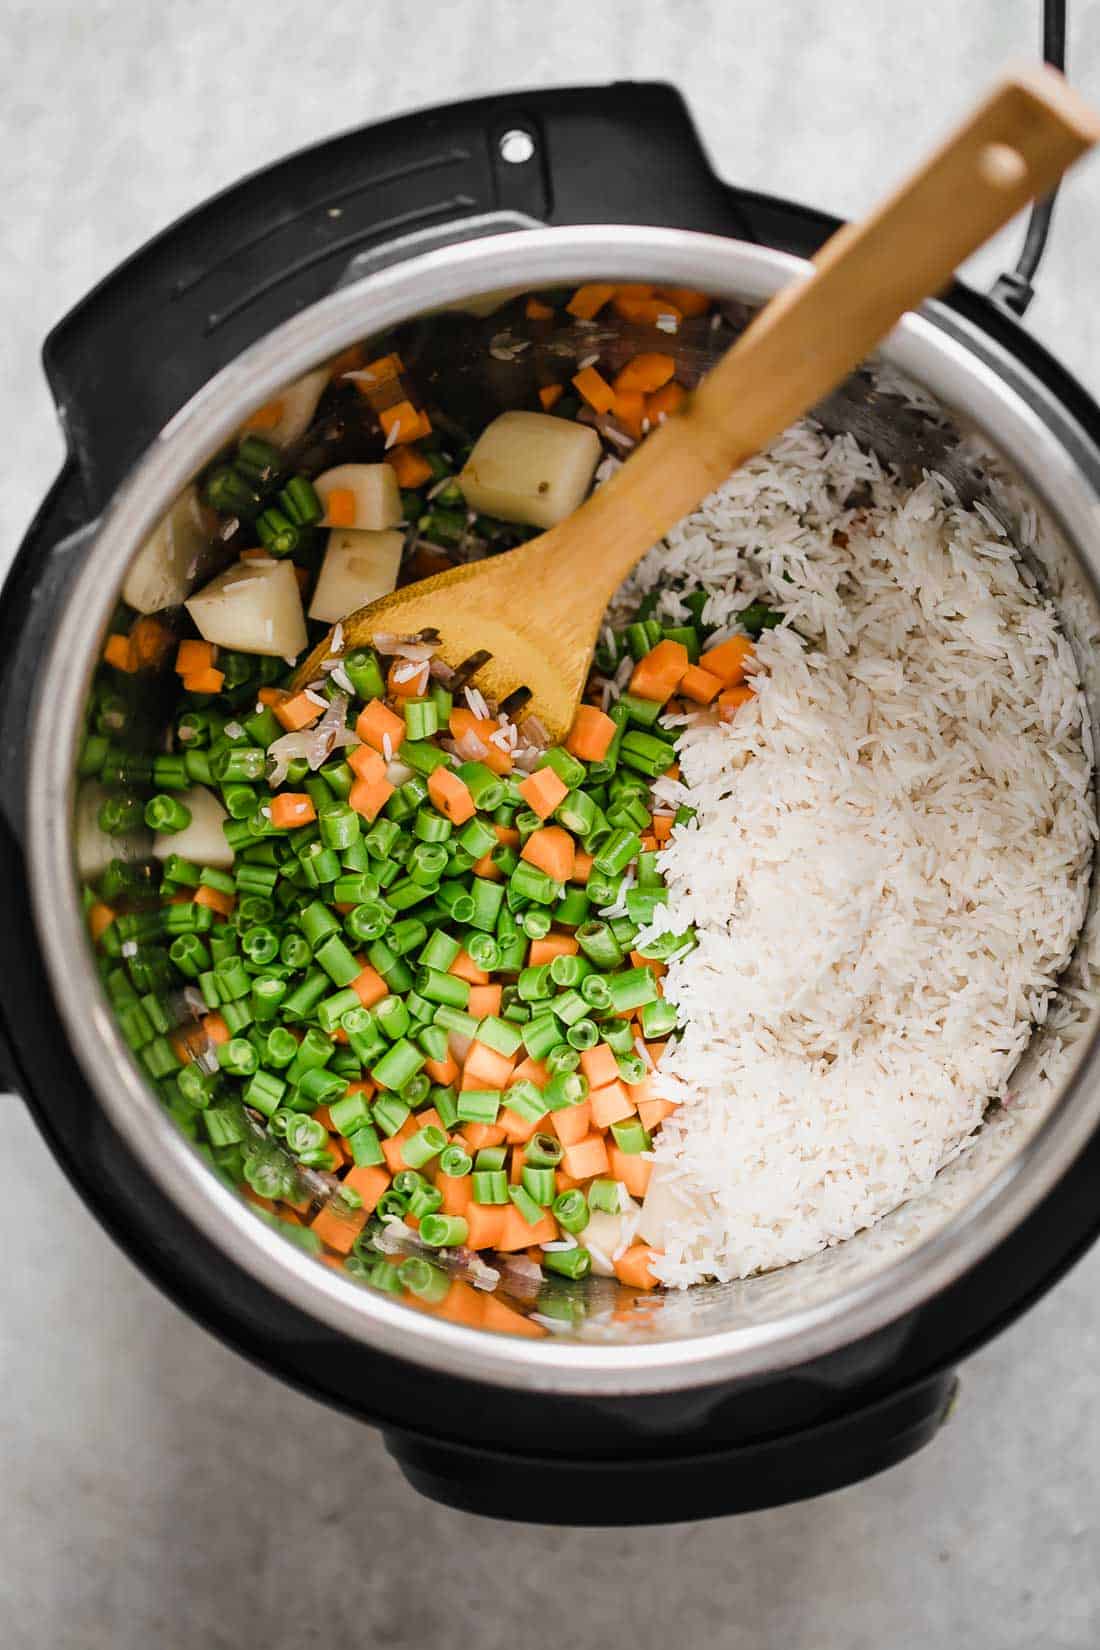 All the ingredients pictures in the Instant Pot for pressure cooker veg pulao